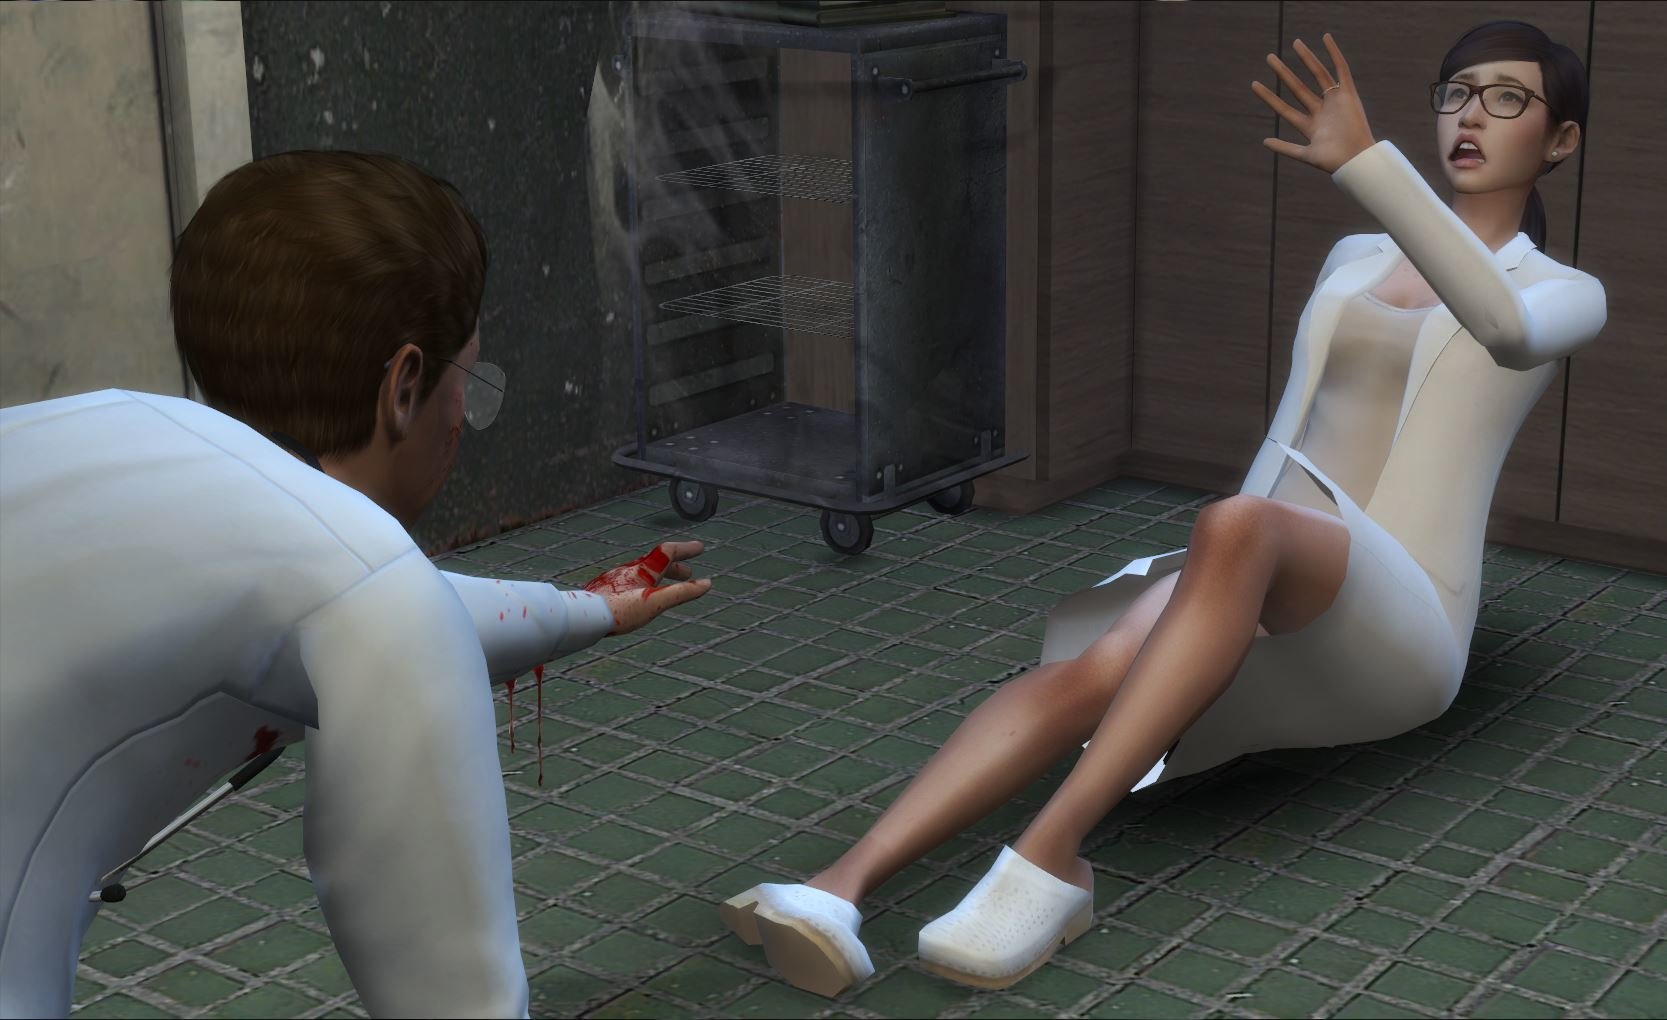 Hot Stories Of My Sims Page 29 The Sims 4 General Discussion